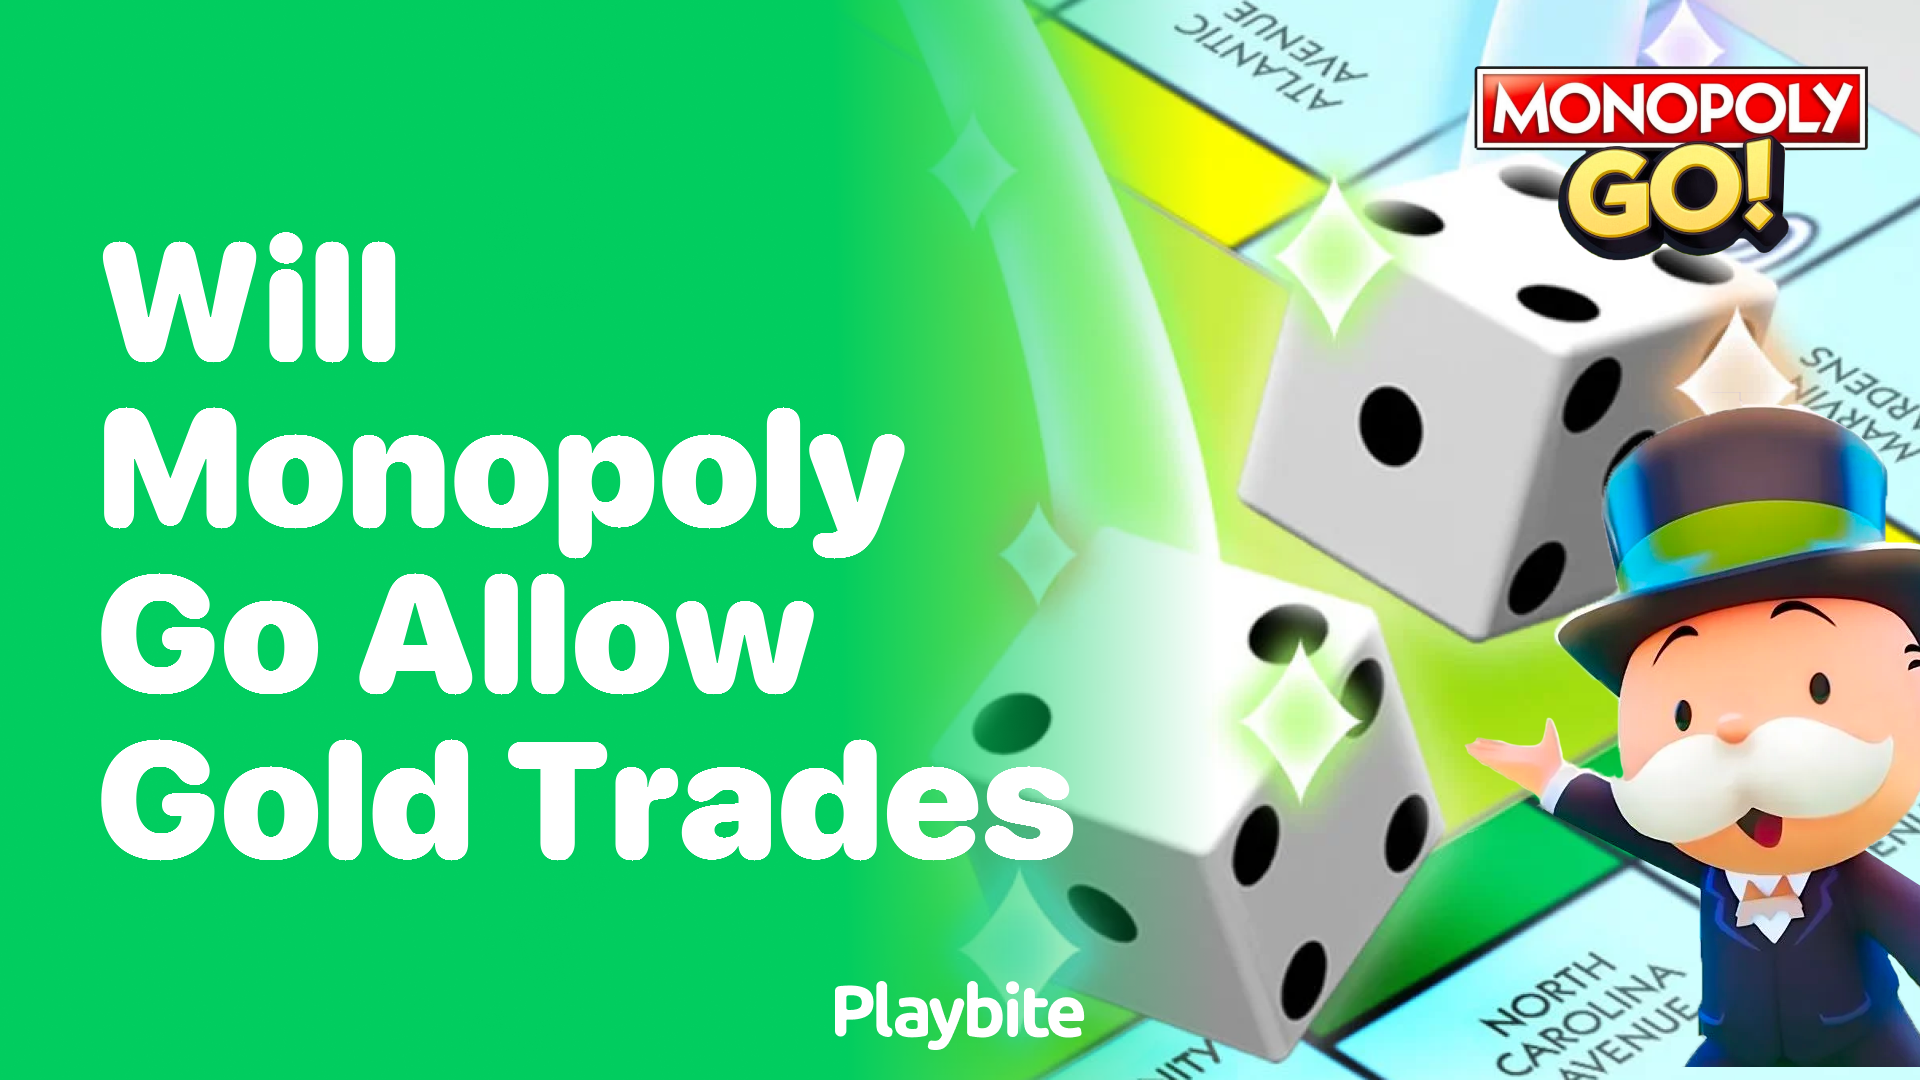 Will Monopoly Go Allow Gold Trades?